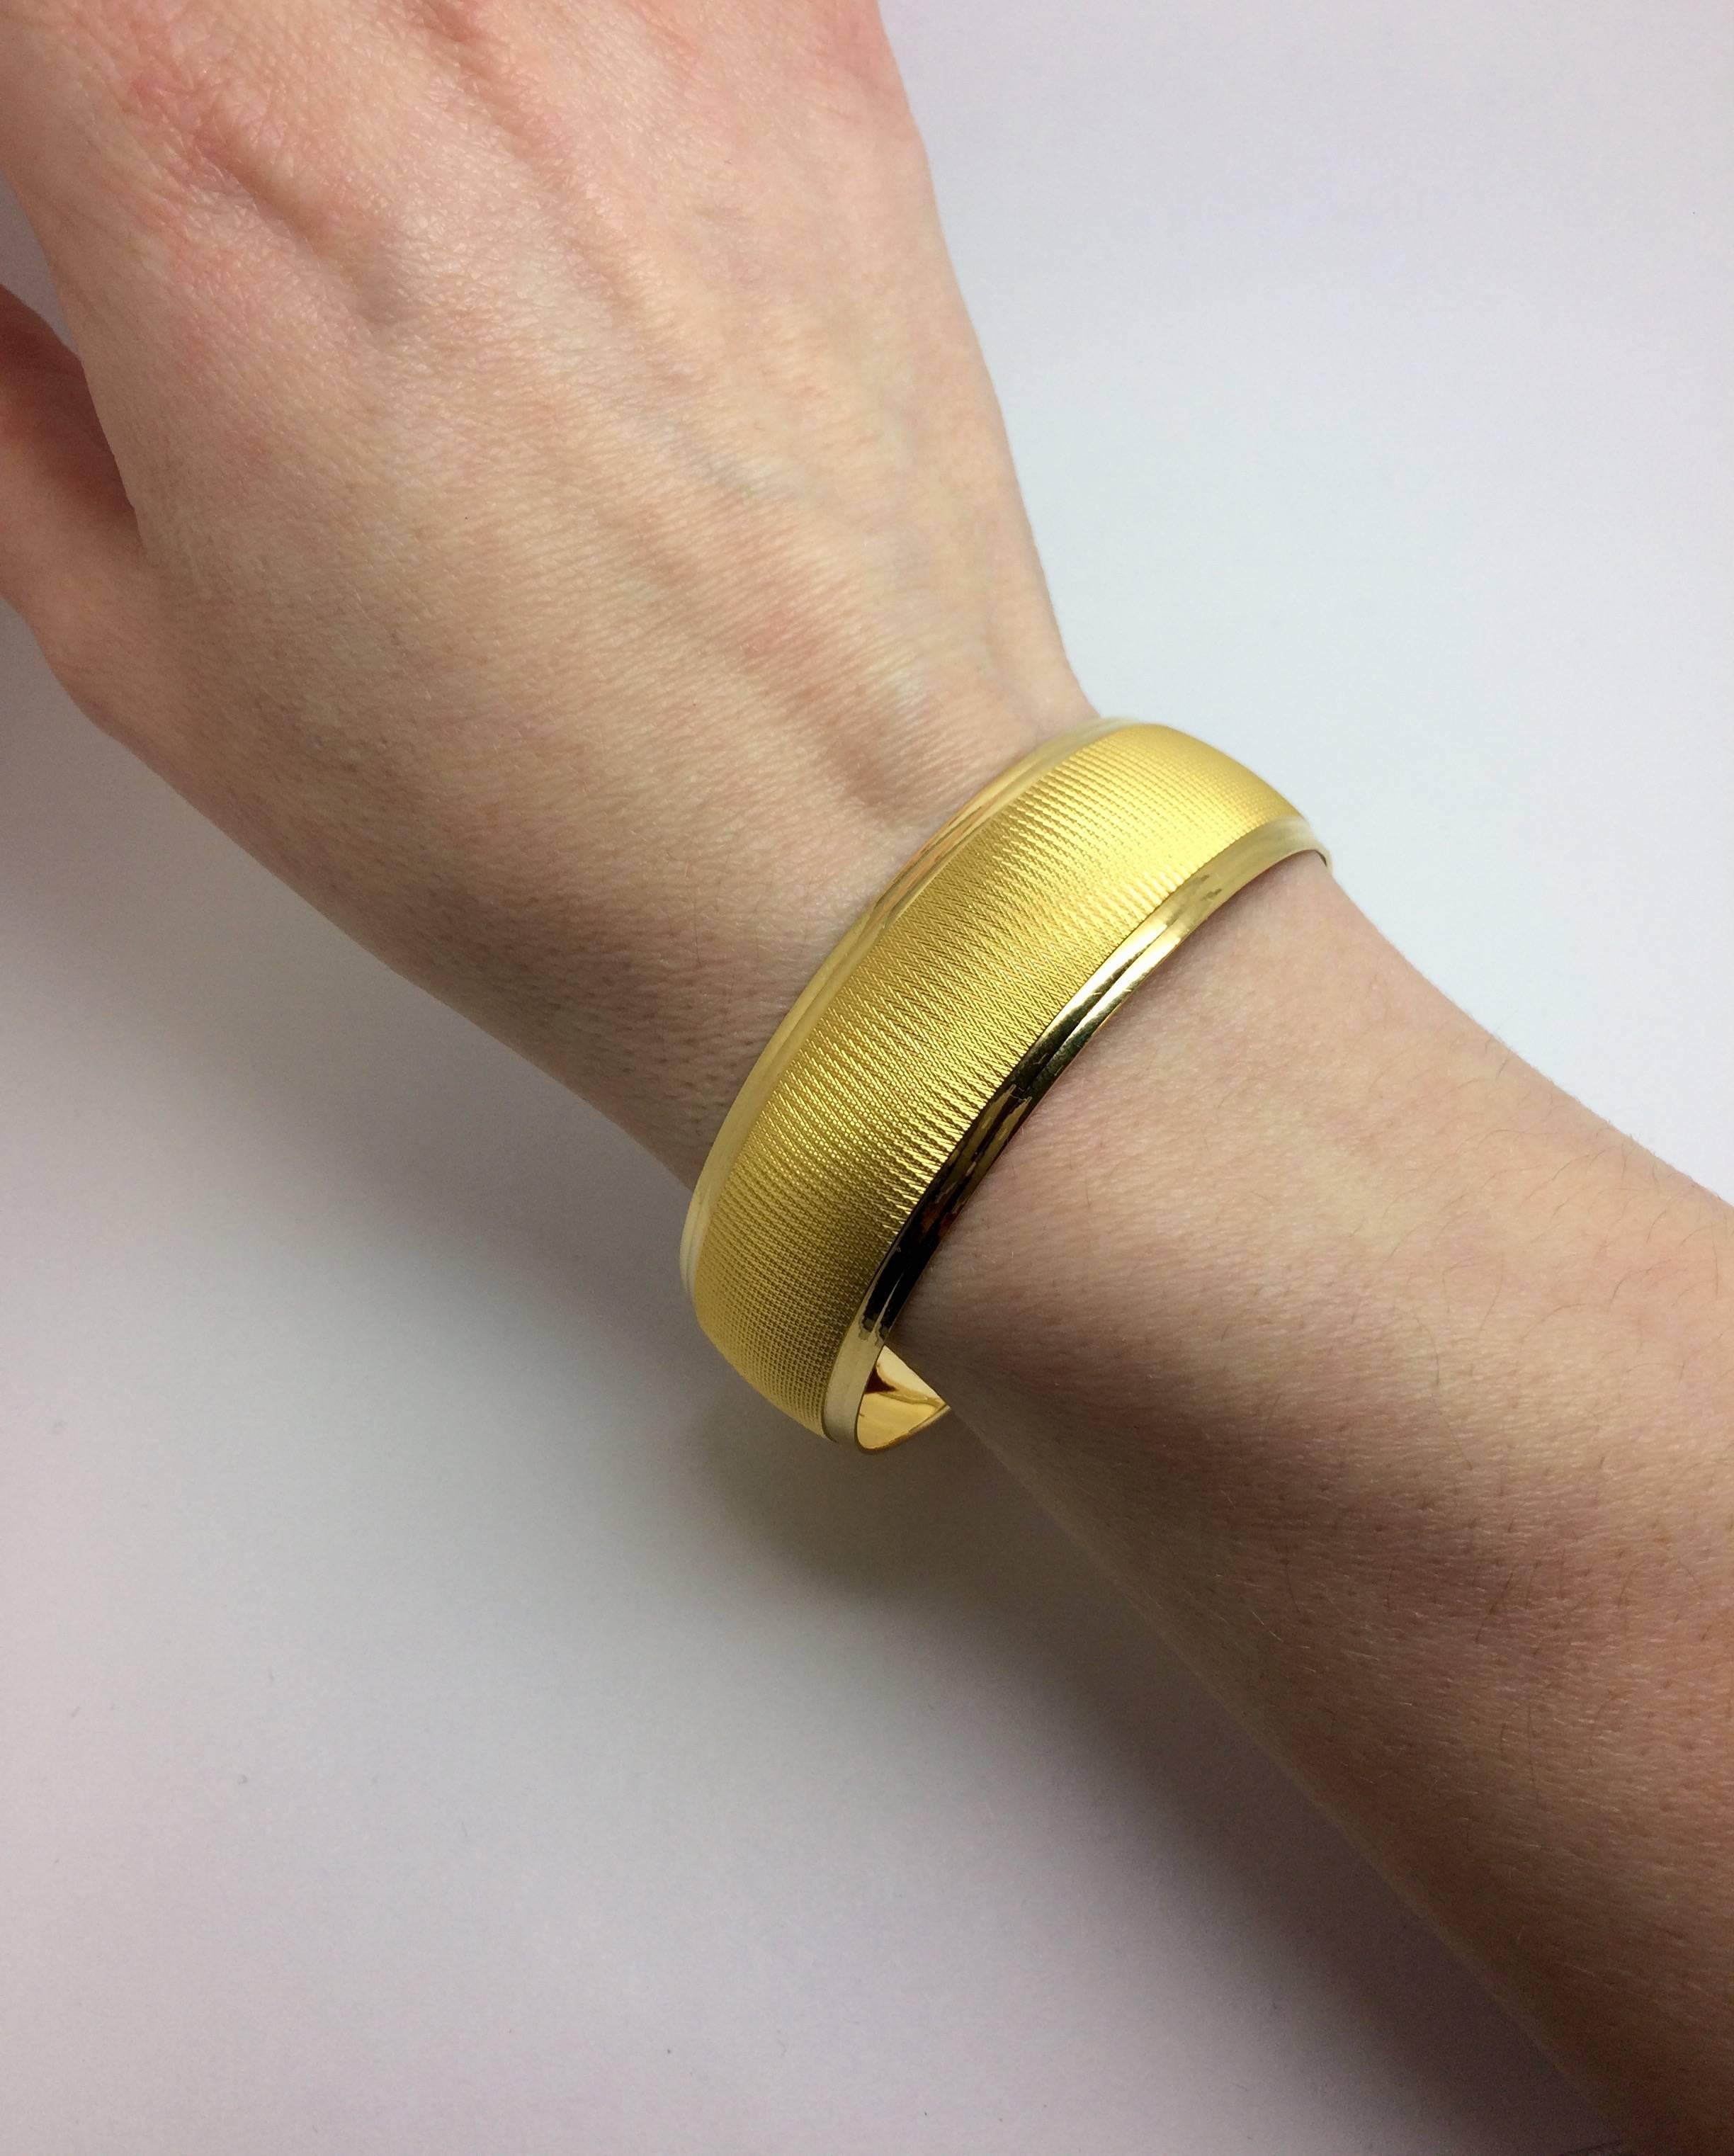 One 22kt yellow gold AU FINJA stamped bangle.  It is circular and has a classic double ridged edge on both sides with a patterned center. It is 6cm in diameter which fits a smaller wrist quite beautifully.